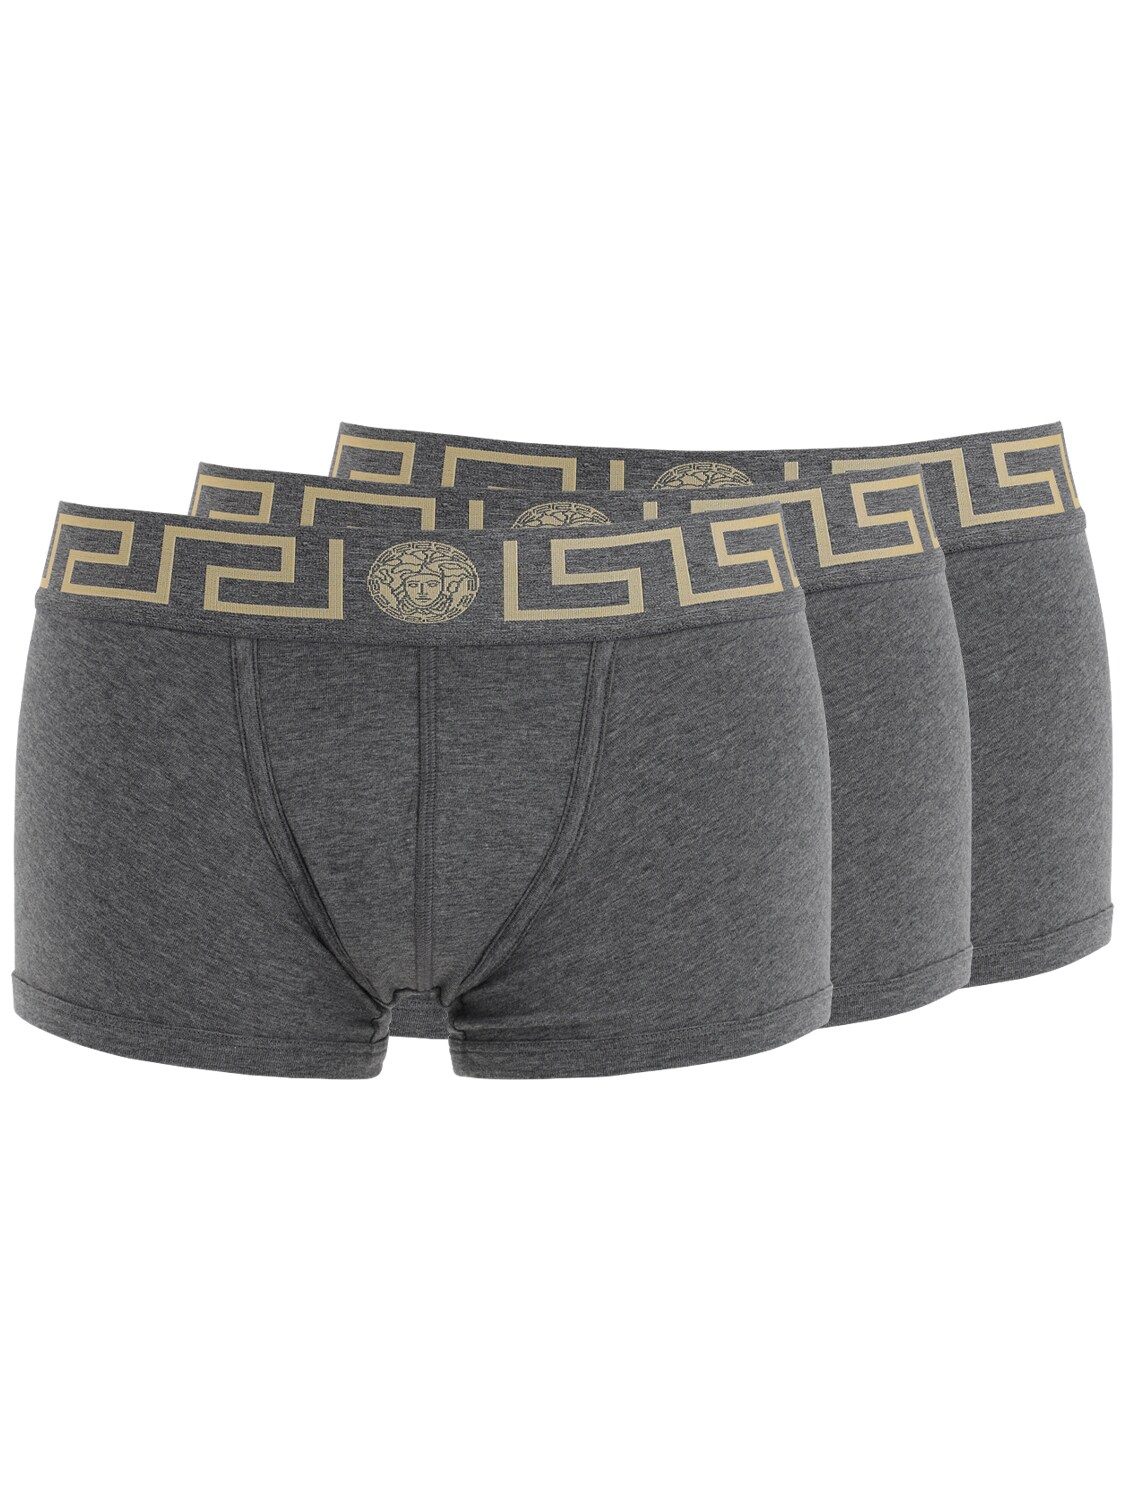 Versace Pack Of 3 Stretch Cotton Boxer Briefs In Heather Grey